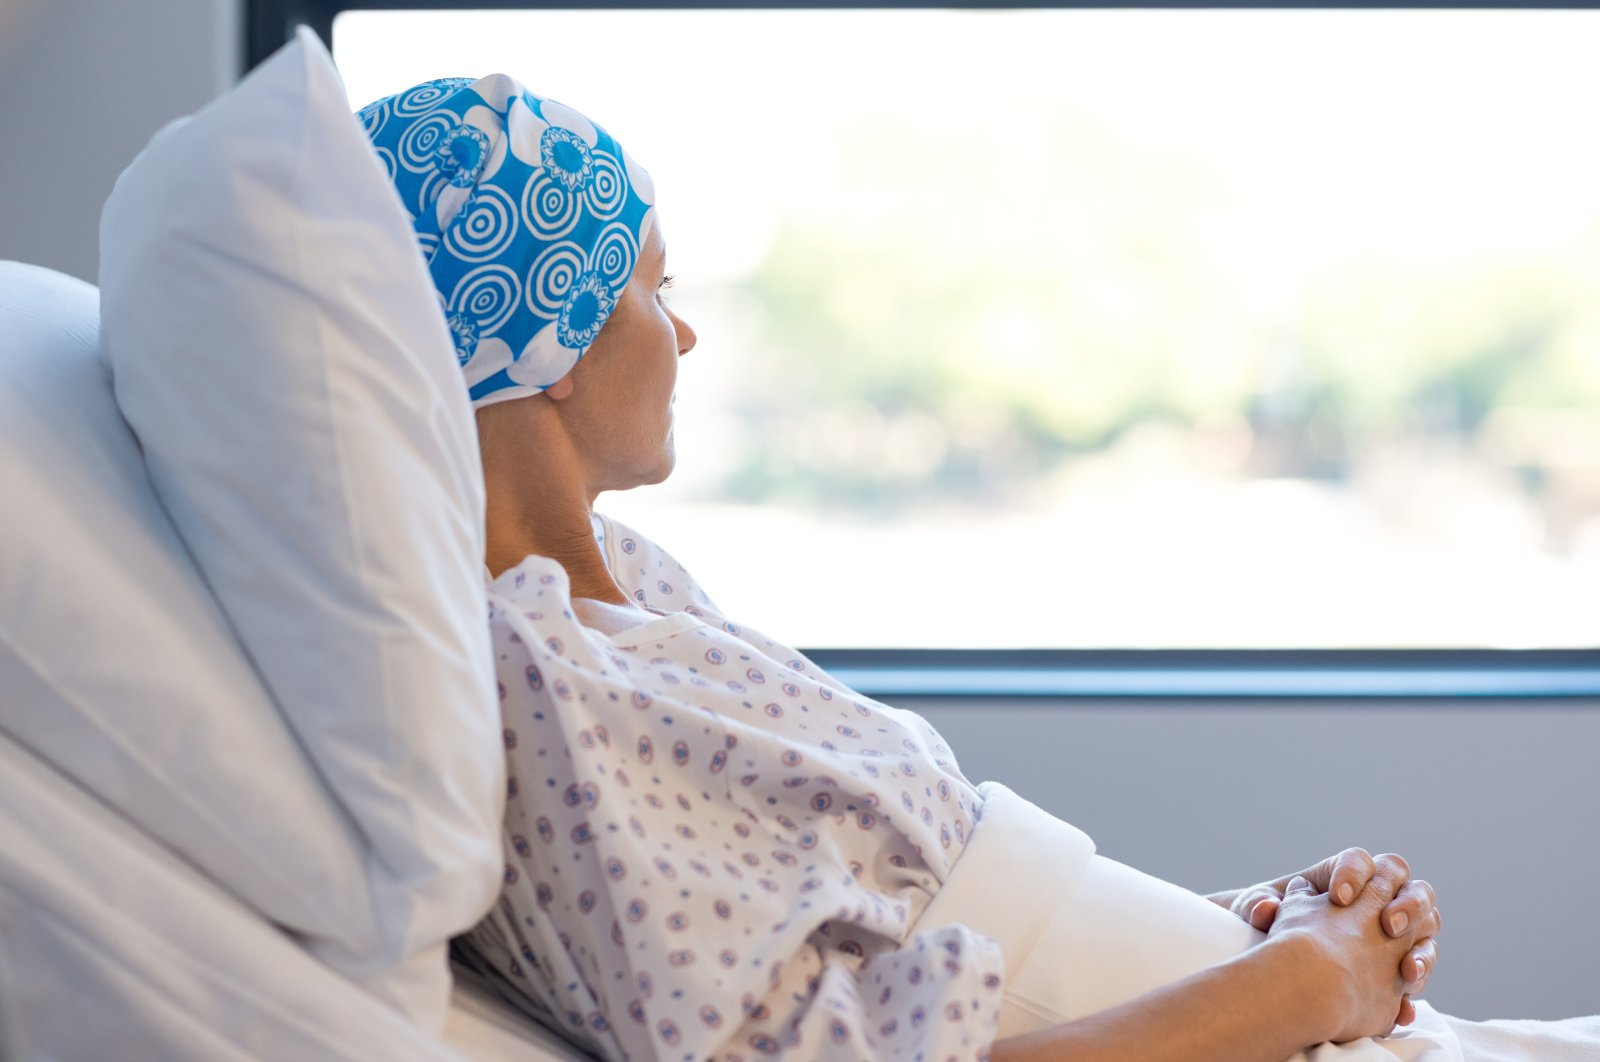 A young patient lies in a hospital bed. (Shutterstock Photo)